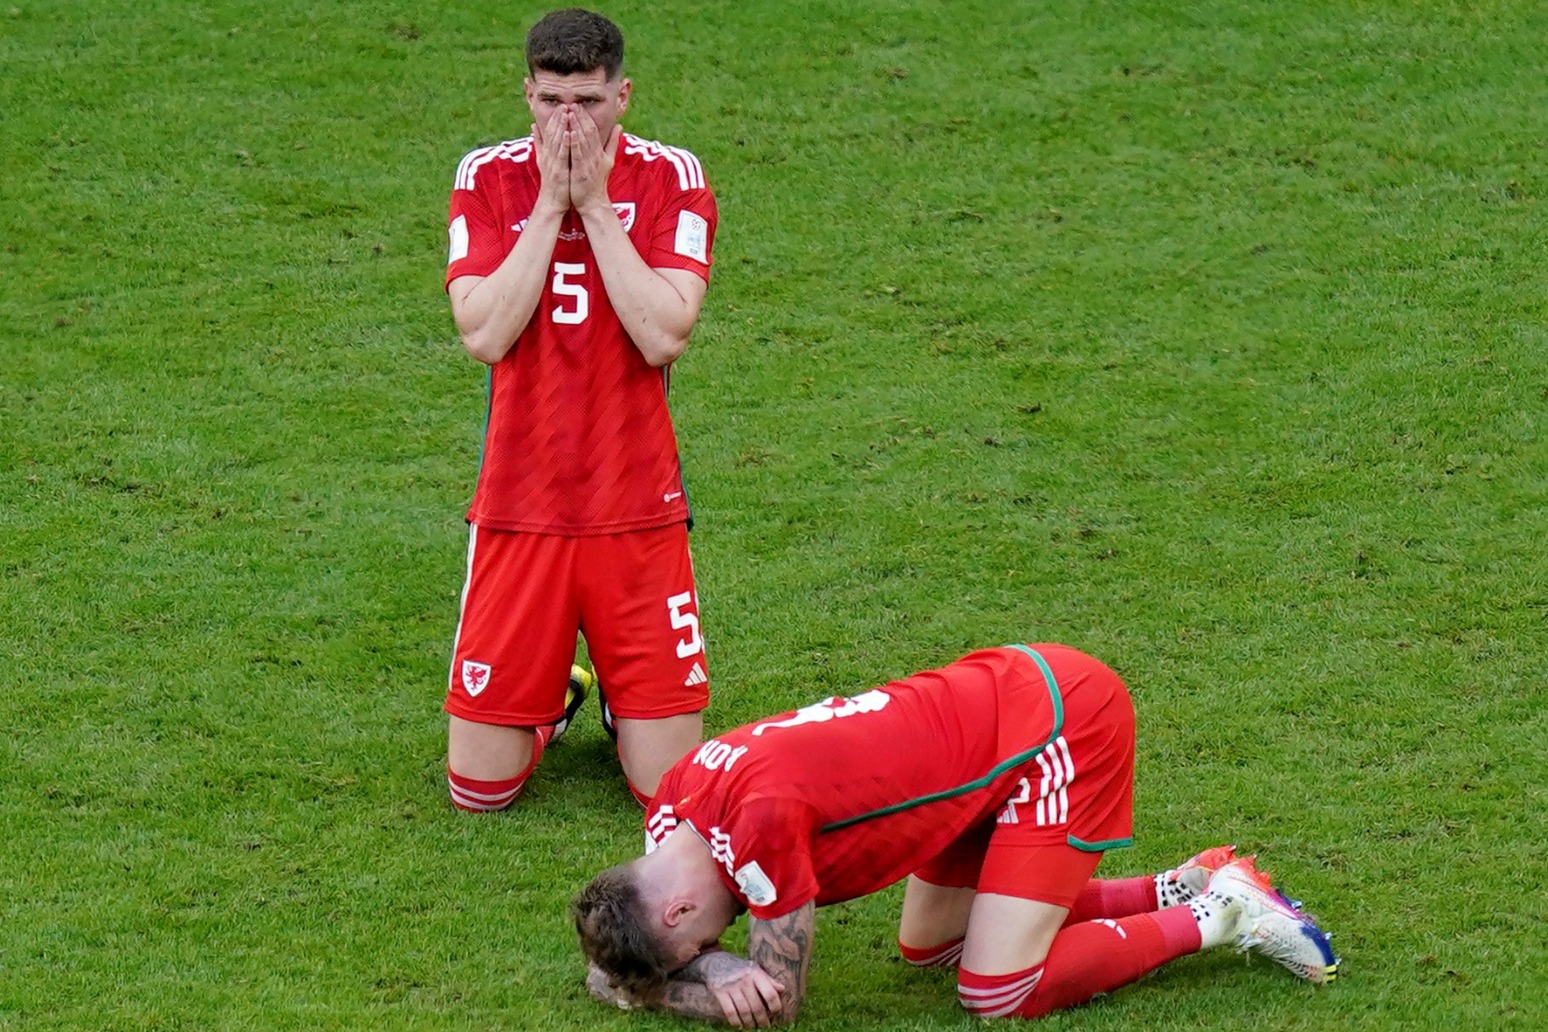 Wales World Cup hopes hanging by a thread after crushing late defeat to Iran